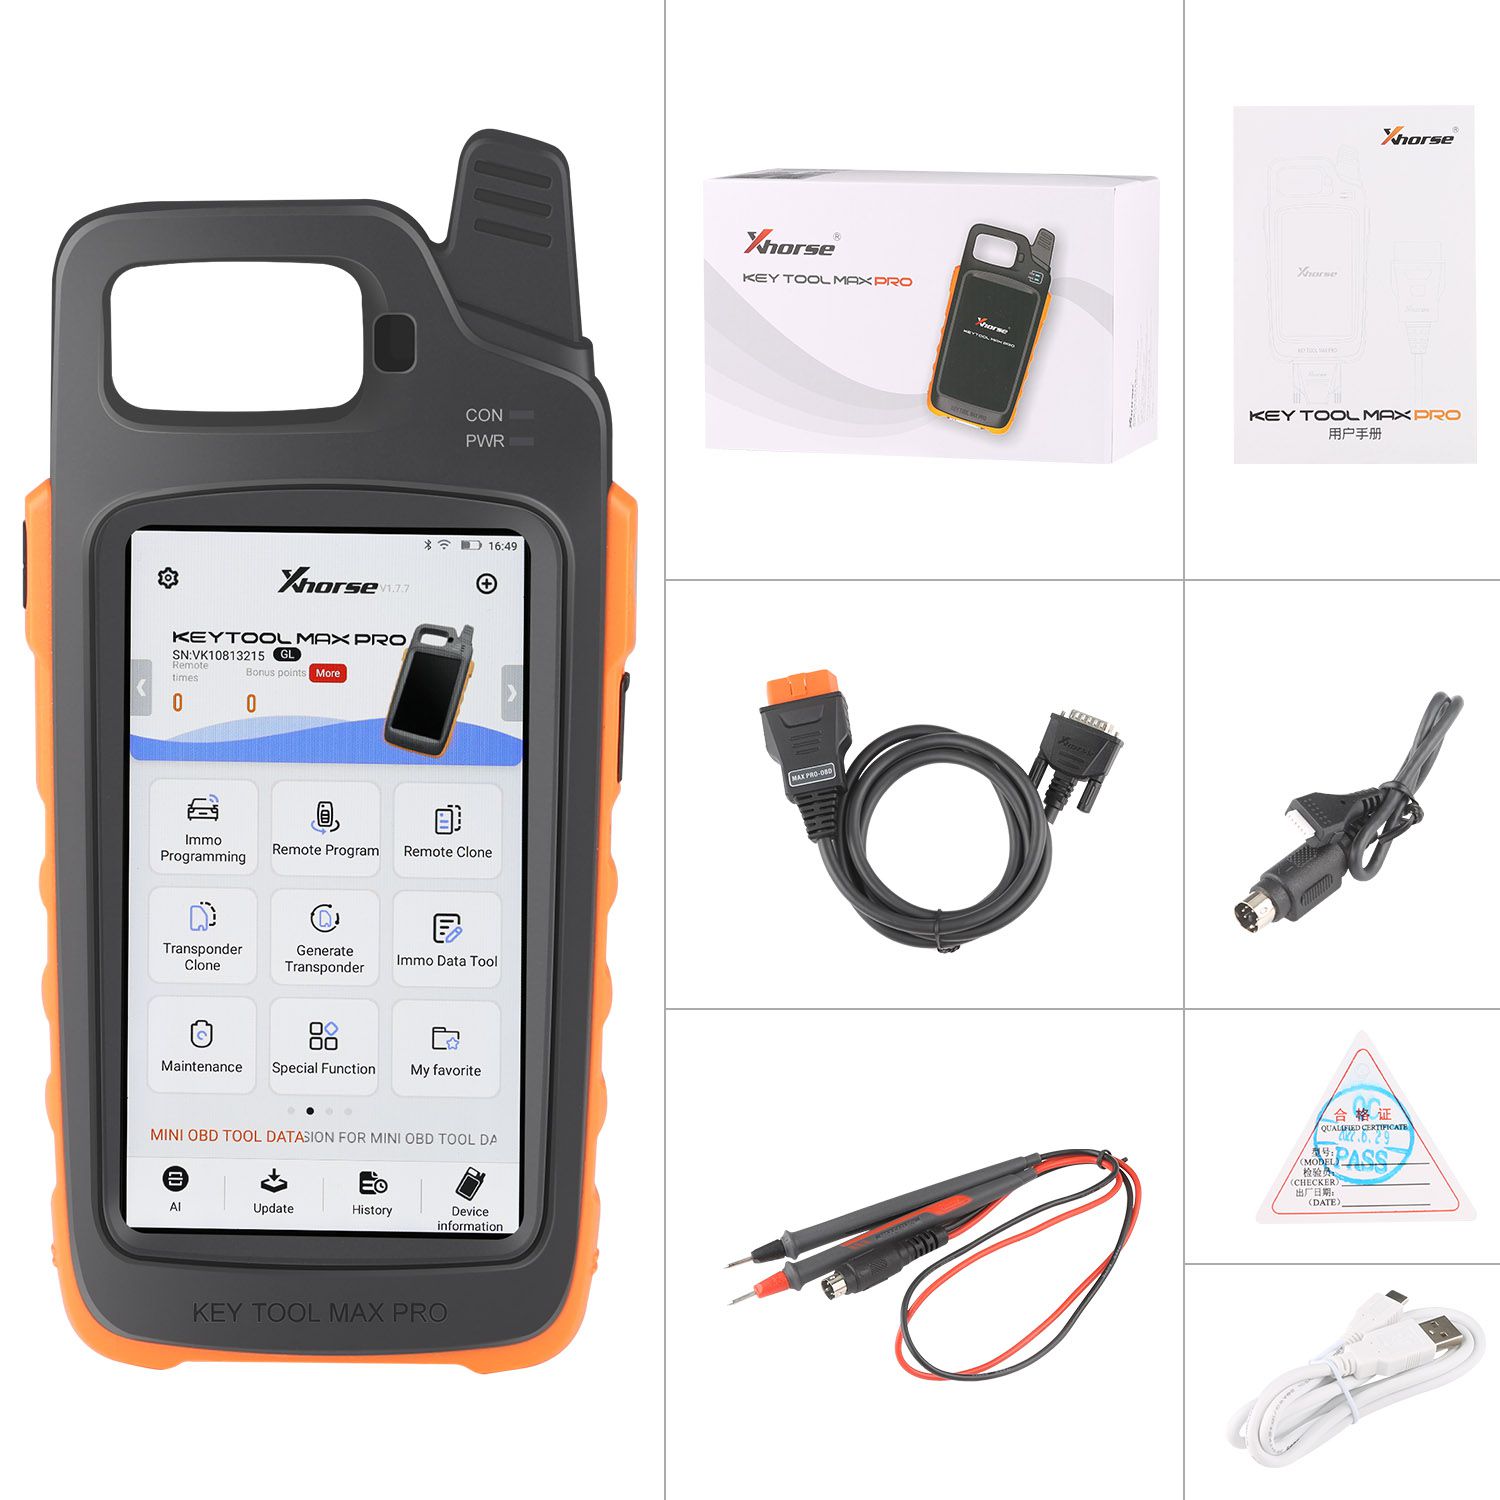 2023 Newest Xhorse VVDI Key Tool Max Pro With MINI OBD Tool Function Support Read Voltage and Leakage Current